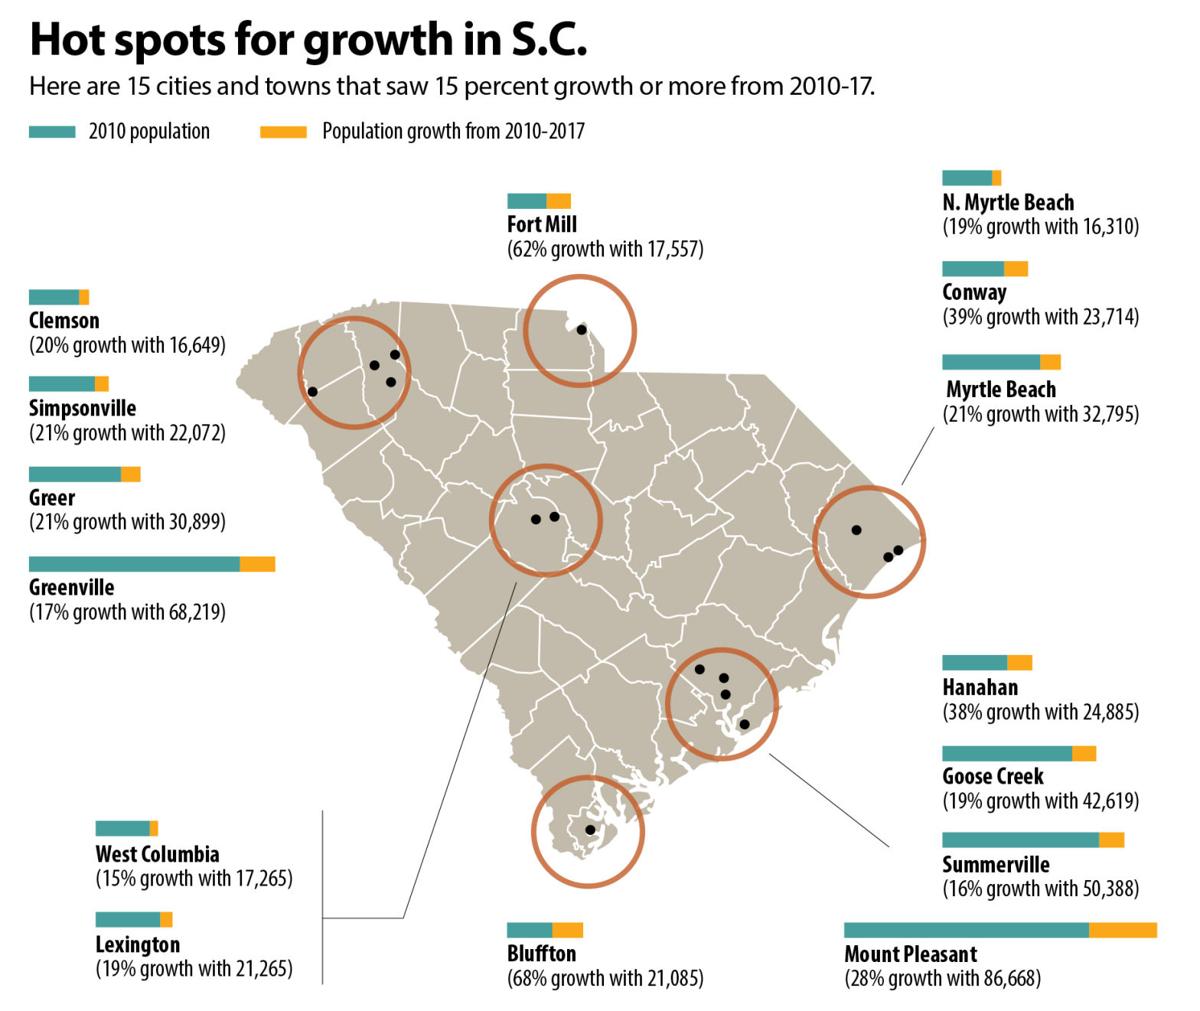 Charleston area, Upstate cities see explosive growth, while Columbia